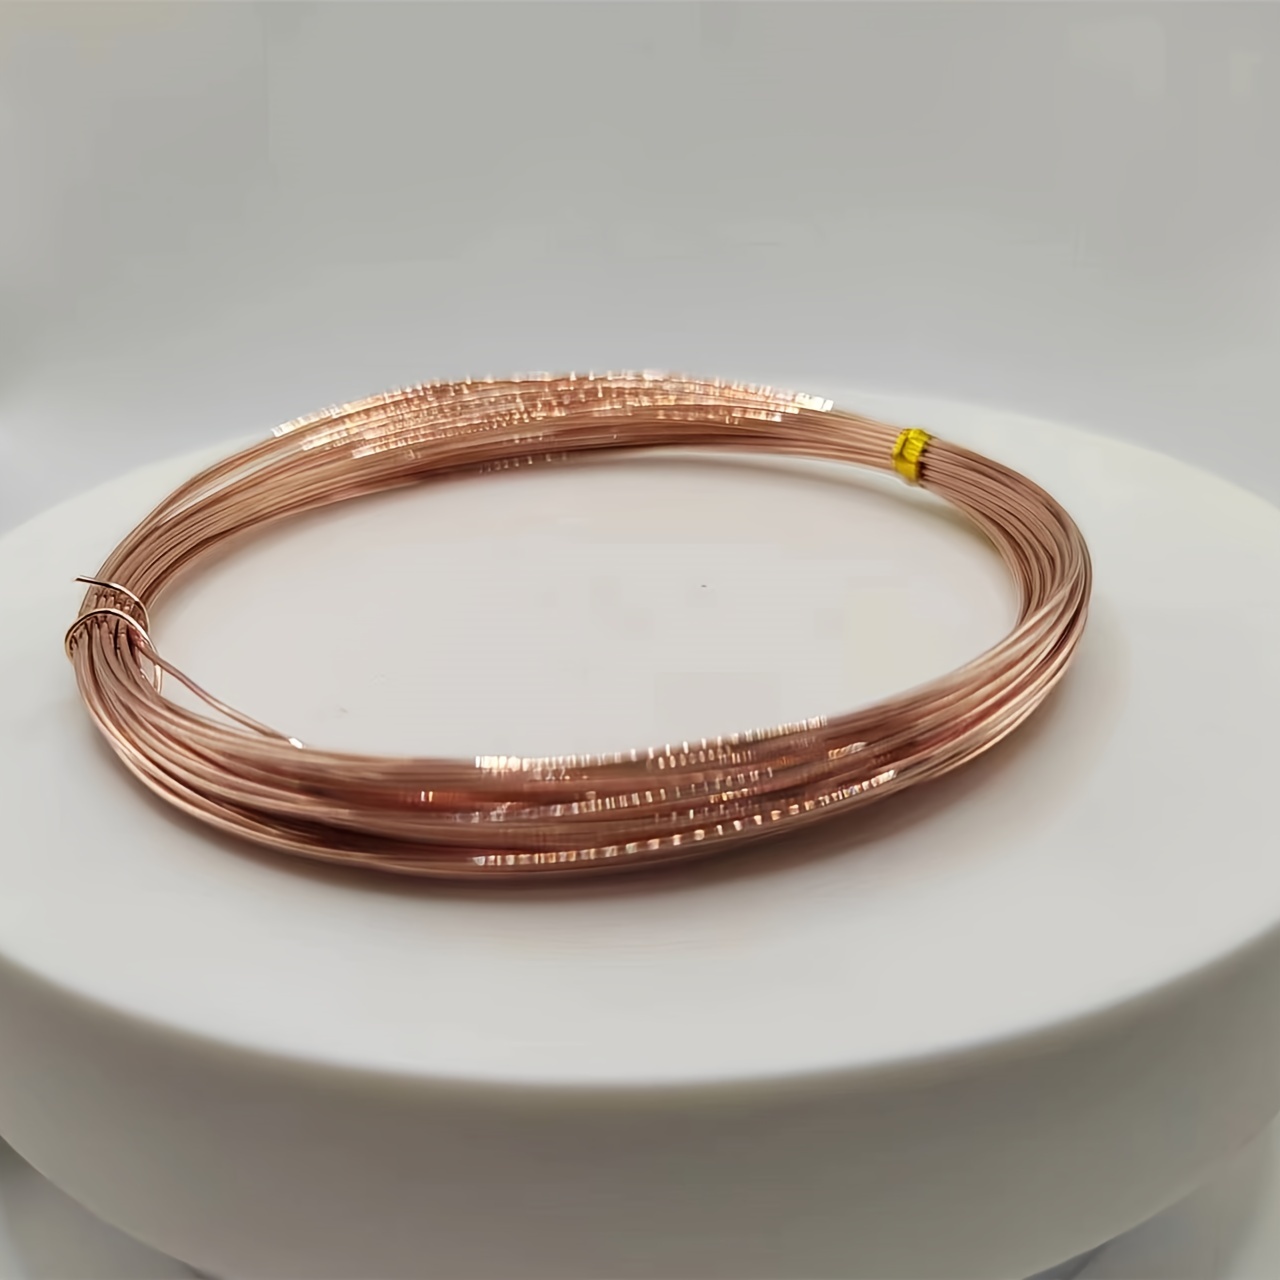 Zoi 22 Gauge Copper Wire Price in India - Buy Zoi 22 Gauge Copper Wire  online at